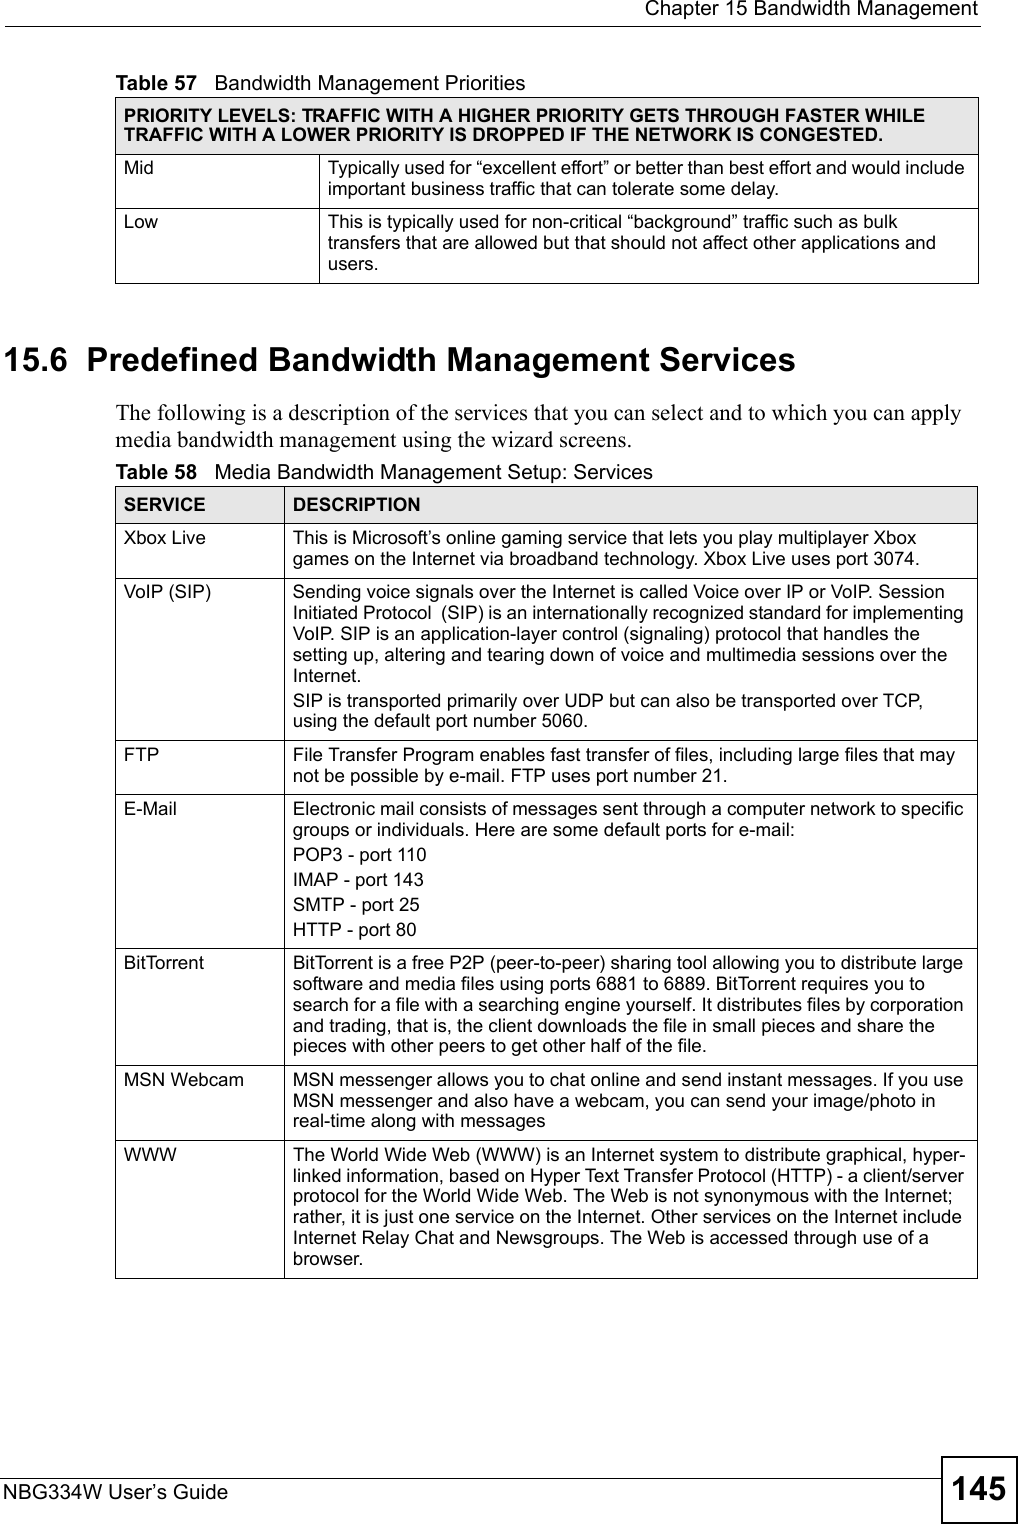  Chapter 15 Bandwidth ManagementNBG334W User’s Guide 14515.6  Predefined Bandwidth Management ServicesThe following is a description of the services that you can select and to which you can apply media bandwidth management using the wizard screens. Mid  Typically used for “excellent effort” or better than best effort and would include important business traffic that can tolerate some delay.Low This is typically used for non-critical “background” traffic such as bulk transfers that are allowed but that should not affect other applications and users. Table 57   Bandwidth Management PrioritiesPRIORITY LEVELS: TRAFFIC WITH A HIGHER PRIORITY GETS THROUGH FASTER WHILE TRAFFIC WITH A LOWER PRIORITY IS DROPPED IF THE NETWORK IS CONGESTED.Table 58   Media Bandwidth Management Setup: ServicesSERVICE DESCRIPTIONXbox Live This is Microsoft’s online gaming service that lets you play multiplayer Xbox games on the Internet via broadband technology. Xbox Live uses port 3074.VoIP (SIP) Sending voice signals over the Internet is called Voice over IP or VoIP. Session Initiated Protocol  (SIP) is an internationally recognized standard for implementing VoIP. SIP is an application-layer control (signaling) protocol that handles the setting up, altering and tearing down of voice and multimedia sessions over the Internet.SIP is transported primarily over UDP but can also be transported over TCP, using the default port number 5060. FTP File Transfer Program enables fast transfer of files, including large files that may not be possible by e-mail. FTP uses port number 21.E-Mail Electronic mail consists of messages sent through a computer network to specific groups or individuals. Here are some default ports for e-mail: POP3 - port 110IMAP - port 143SMTP - port 25HTTP - port 80BitTorrent BitTorrent is a free P2P (peer-to-peer) sharing tool allowing you to distribute large software and media files using ports 6881 to 6889. BitTorrent requires you to search for a file with a searching engine yourself. It distributes files by corporation and trading, that is, the client downloads the file in small pieces and share the pieces with other peers to get other half of the file.MSN Webcam MSN messenger allows you to chat online and send instant messages. If you use MSN messenger and also have a webcam, you can send your image/photo in real-time along with messagesWWW The World Wide Web (WWW) is an Internet system to distribute graphical, hyper-linked information, based on Hyper Text Transfer Protocol (HTTP) - a client/server protocol for the World Wide Web. The Web is not synonymous with the Internet; rather, it is just one service on the Internet. Other services on the Internet include Internet Relay Chat and Newsgroups. The Web is accessed through use of a browser.